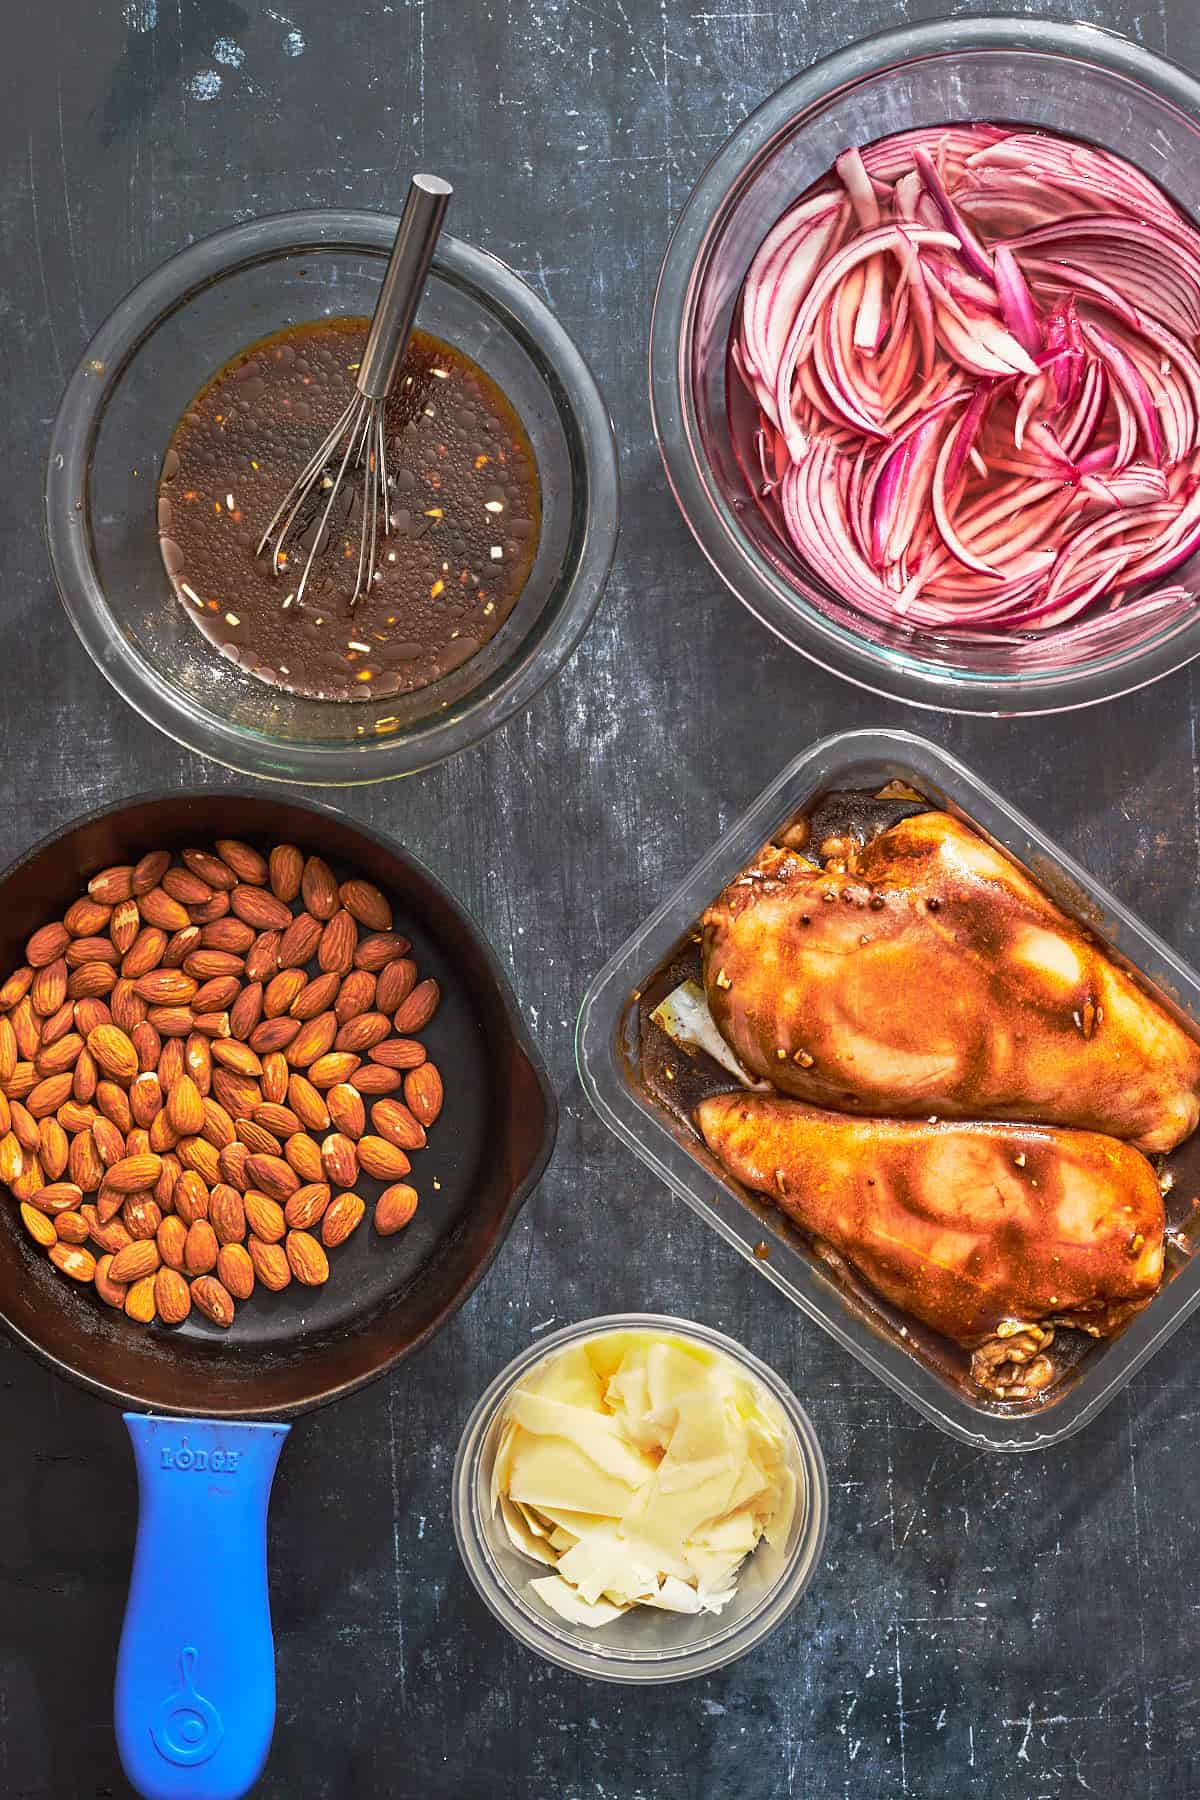 almonds toasting in small pan, bowl of onions, bowl of dressing, and chicken covered in marinade